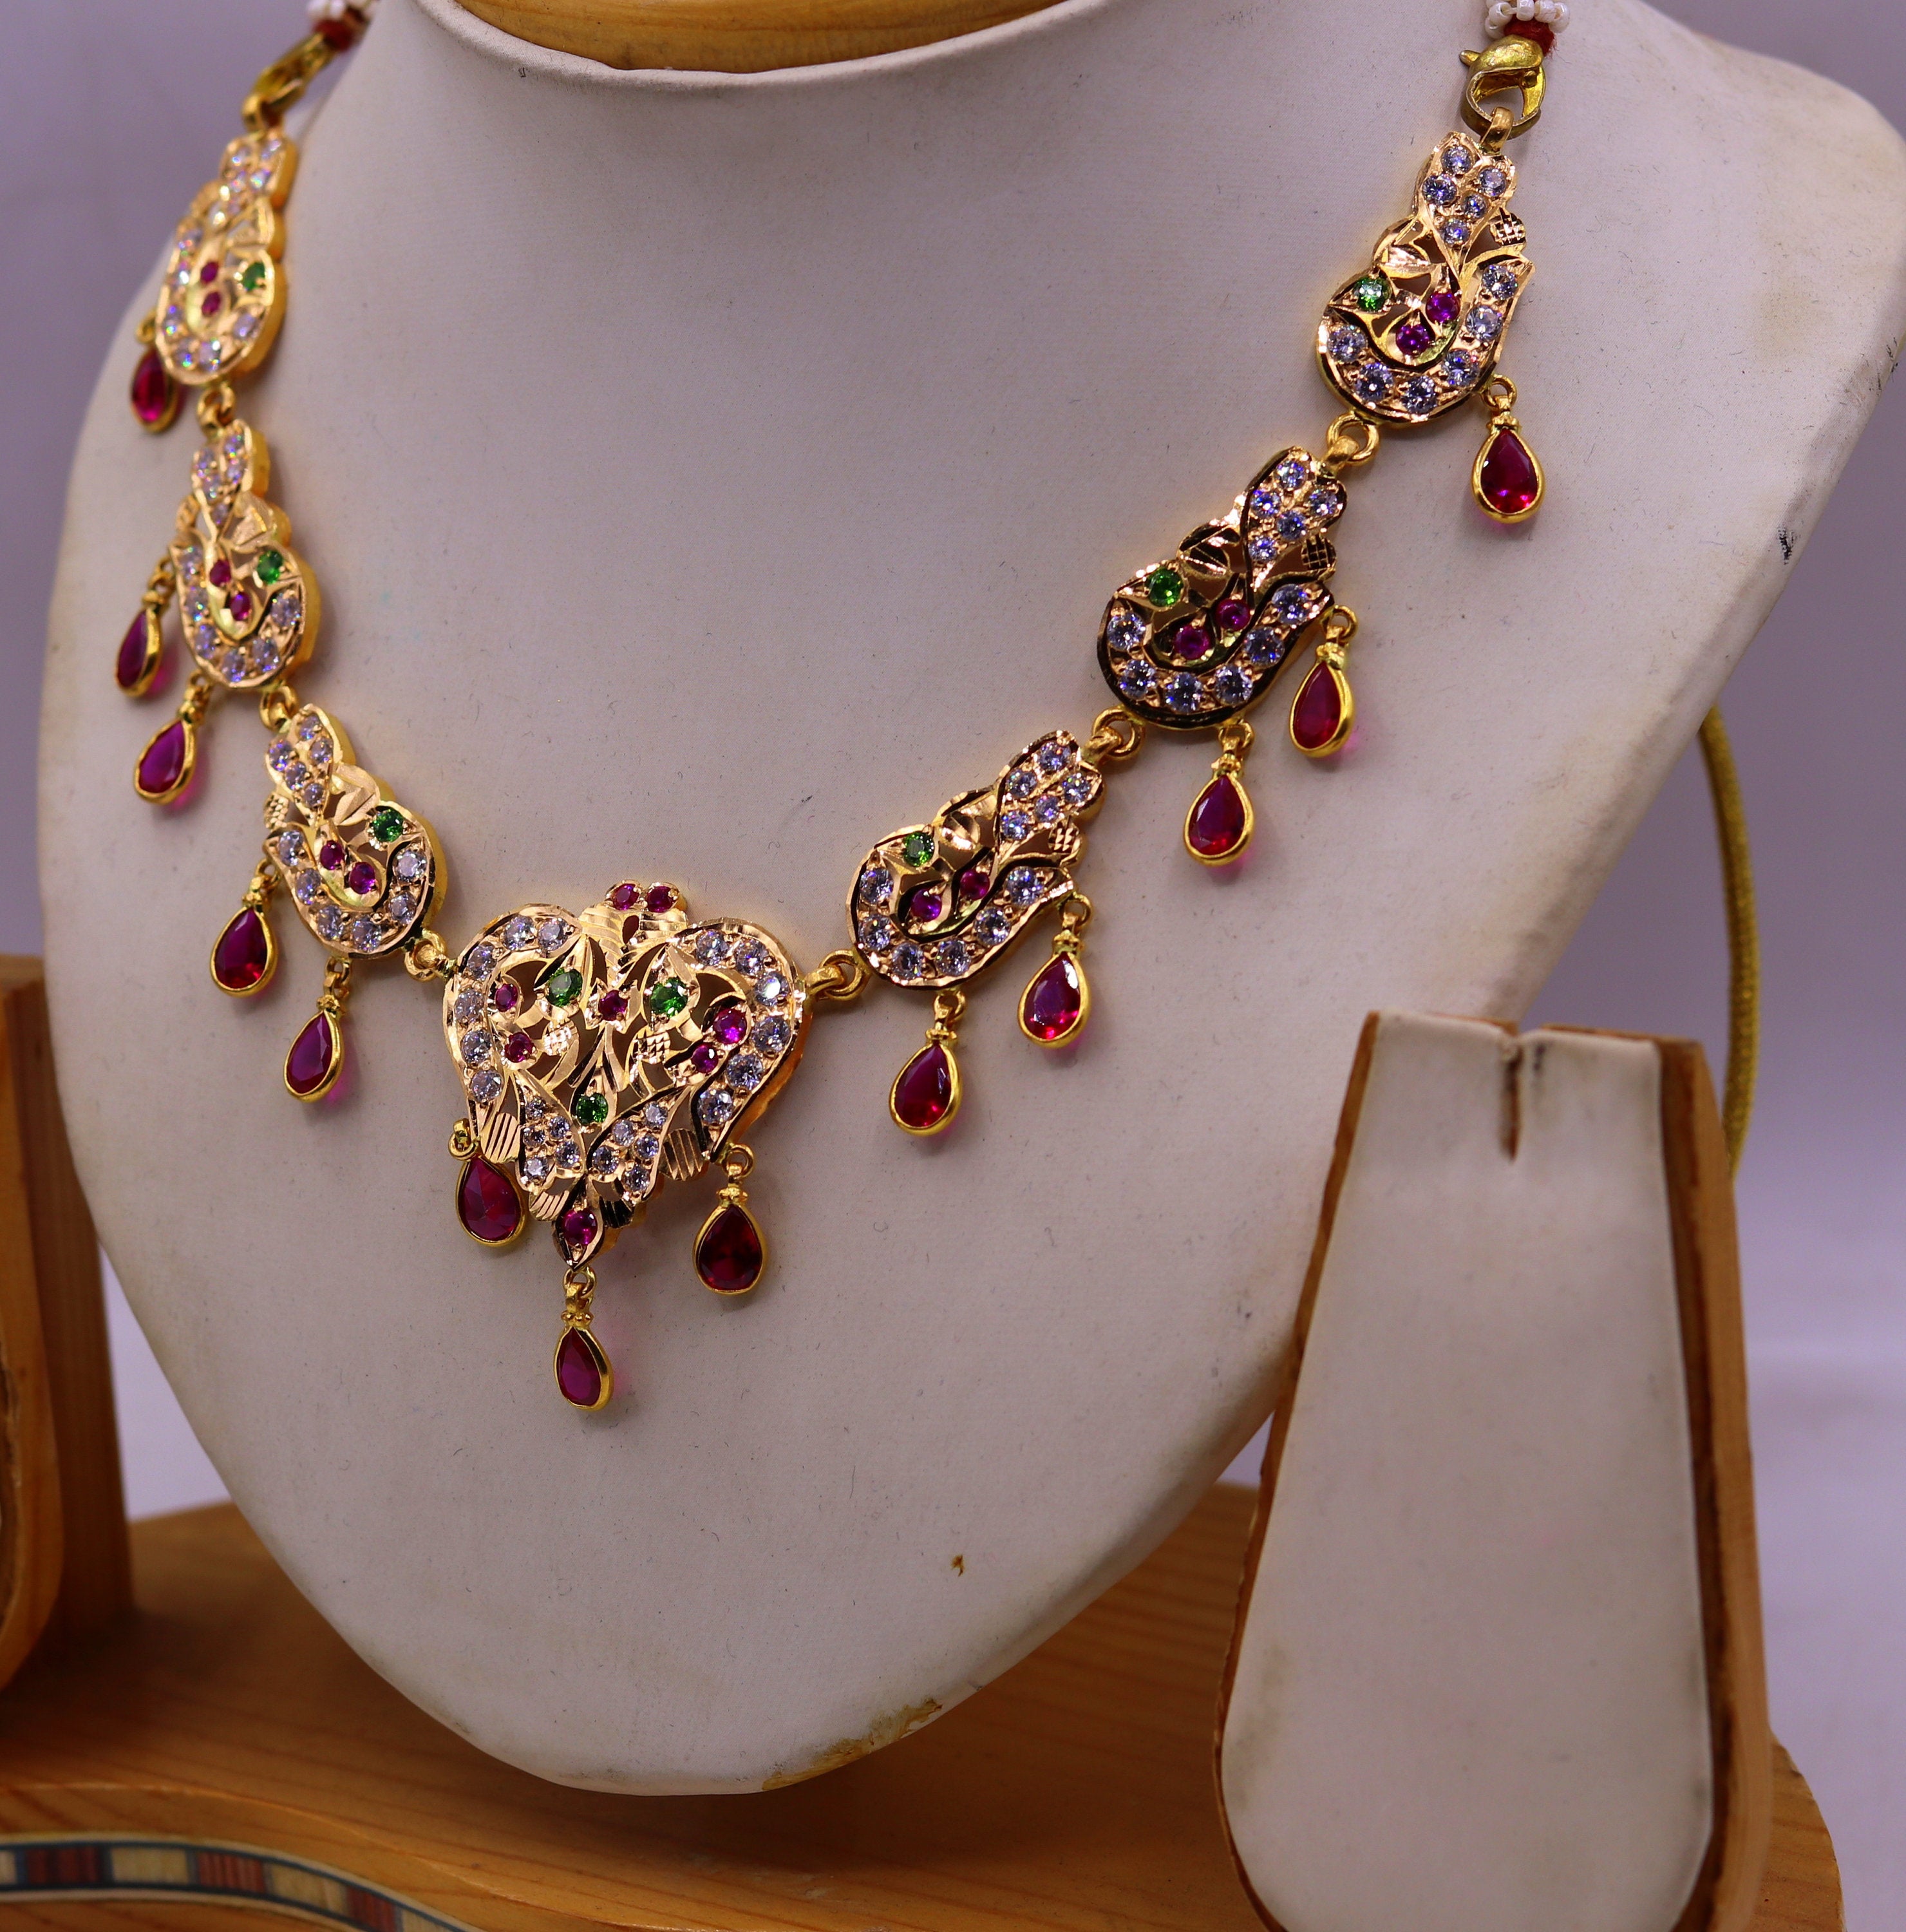 Indian Gold Set (22K) - AjNs54992 - 22K Gold Necklace and Earrings set with  filigree design and polki type stones studded. Earring :